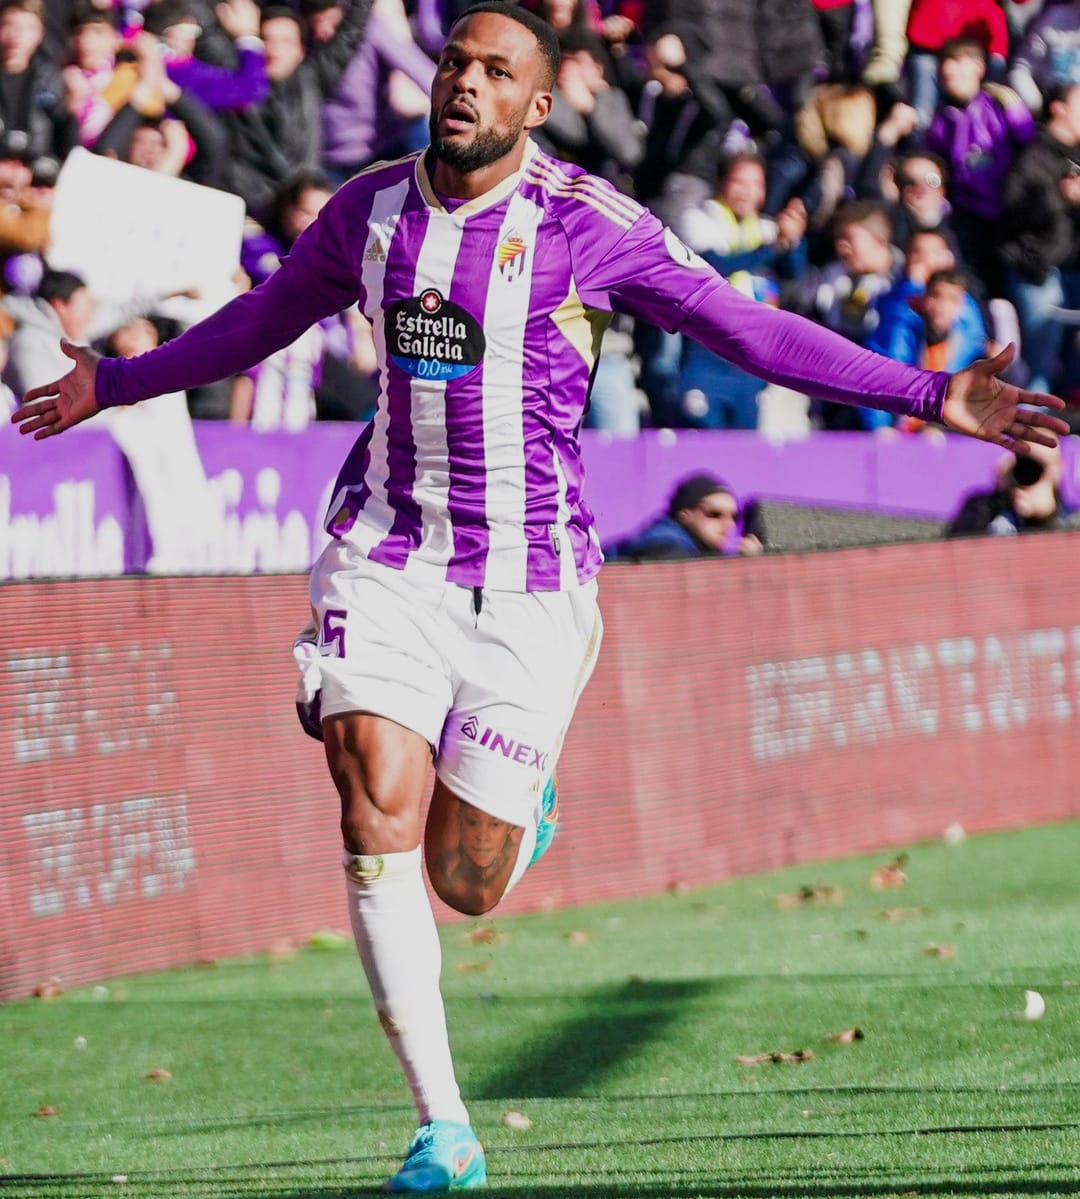 Larin celebrating a goal/ Source Real Valladolid